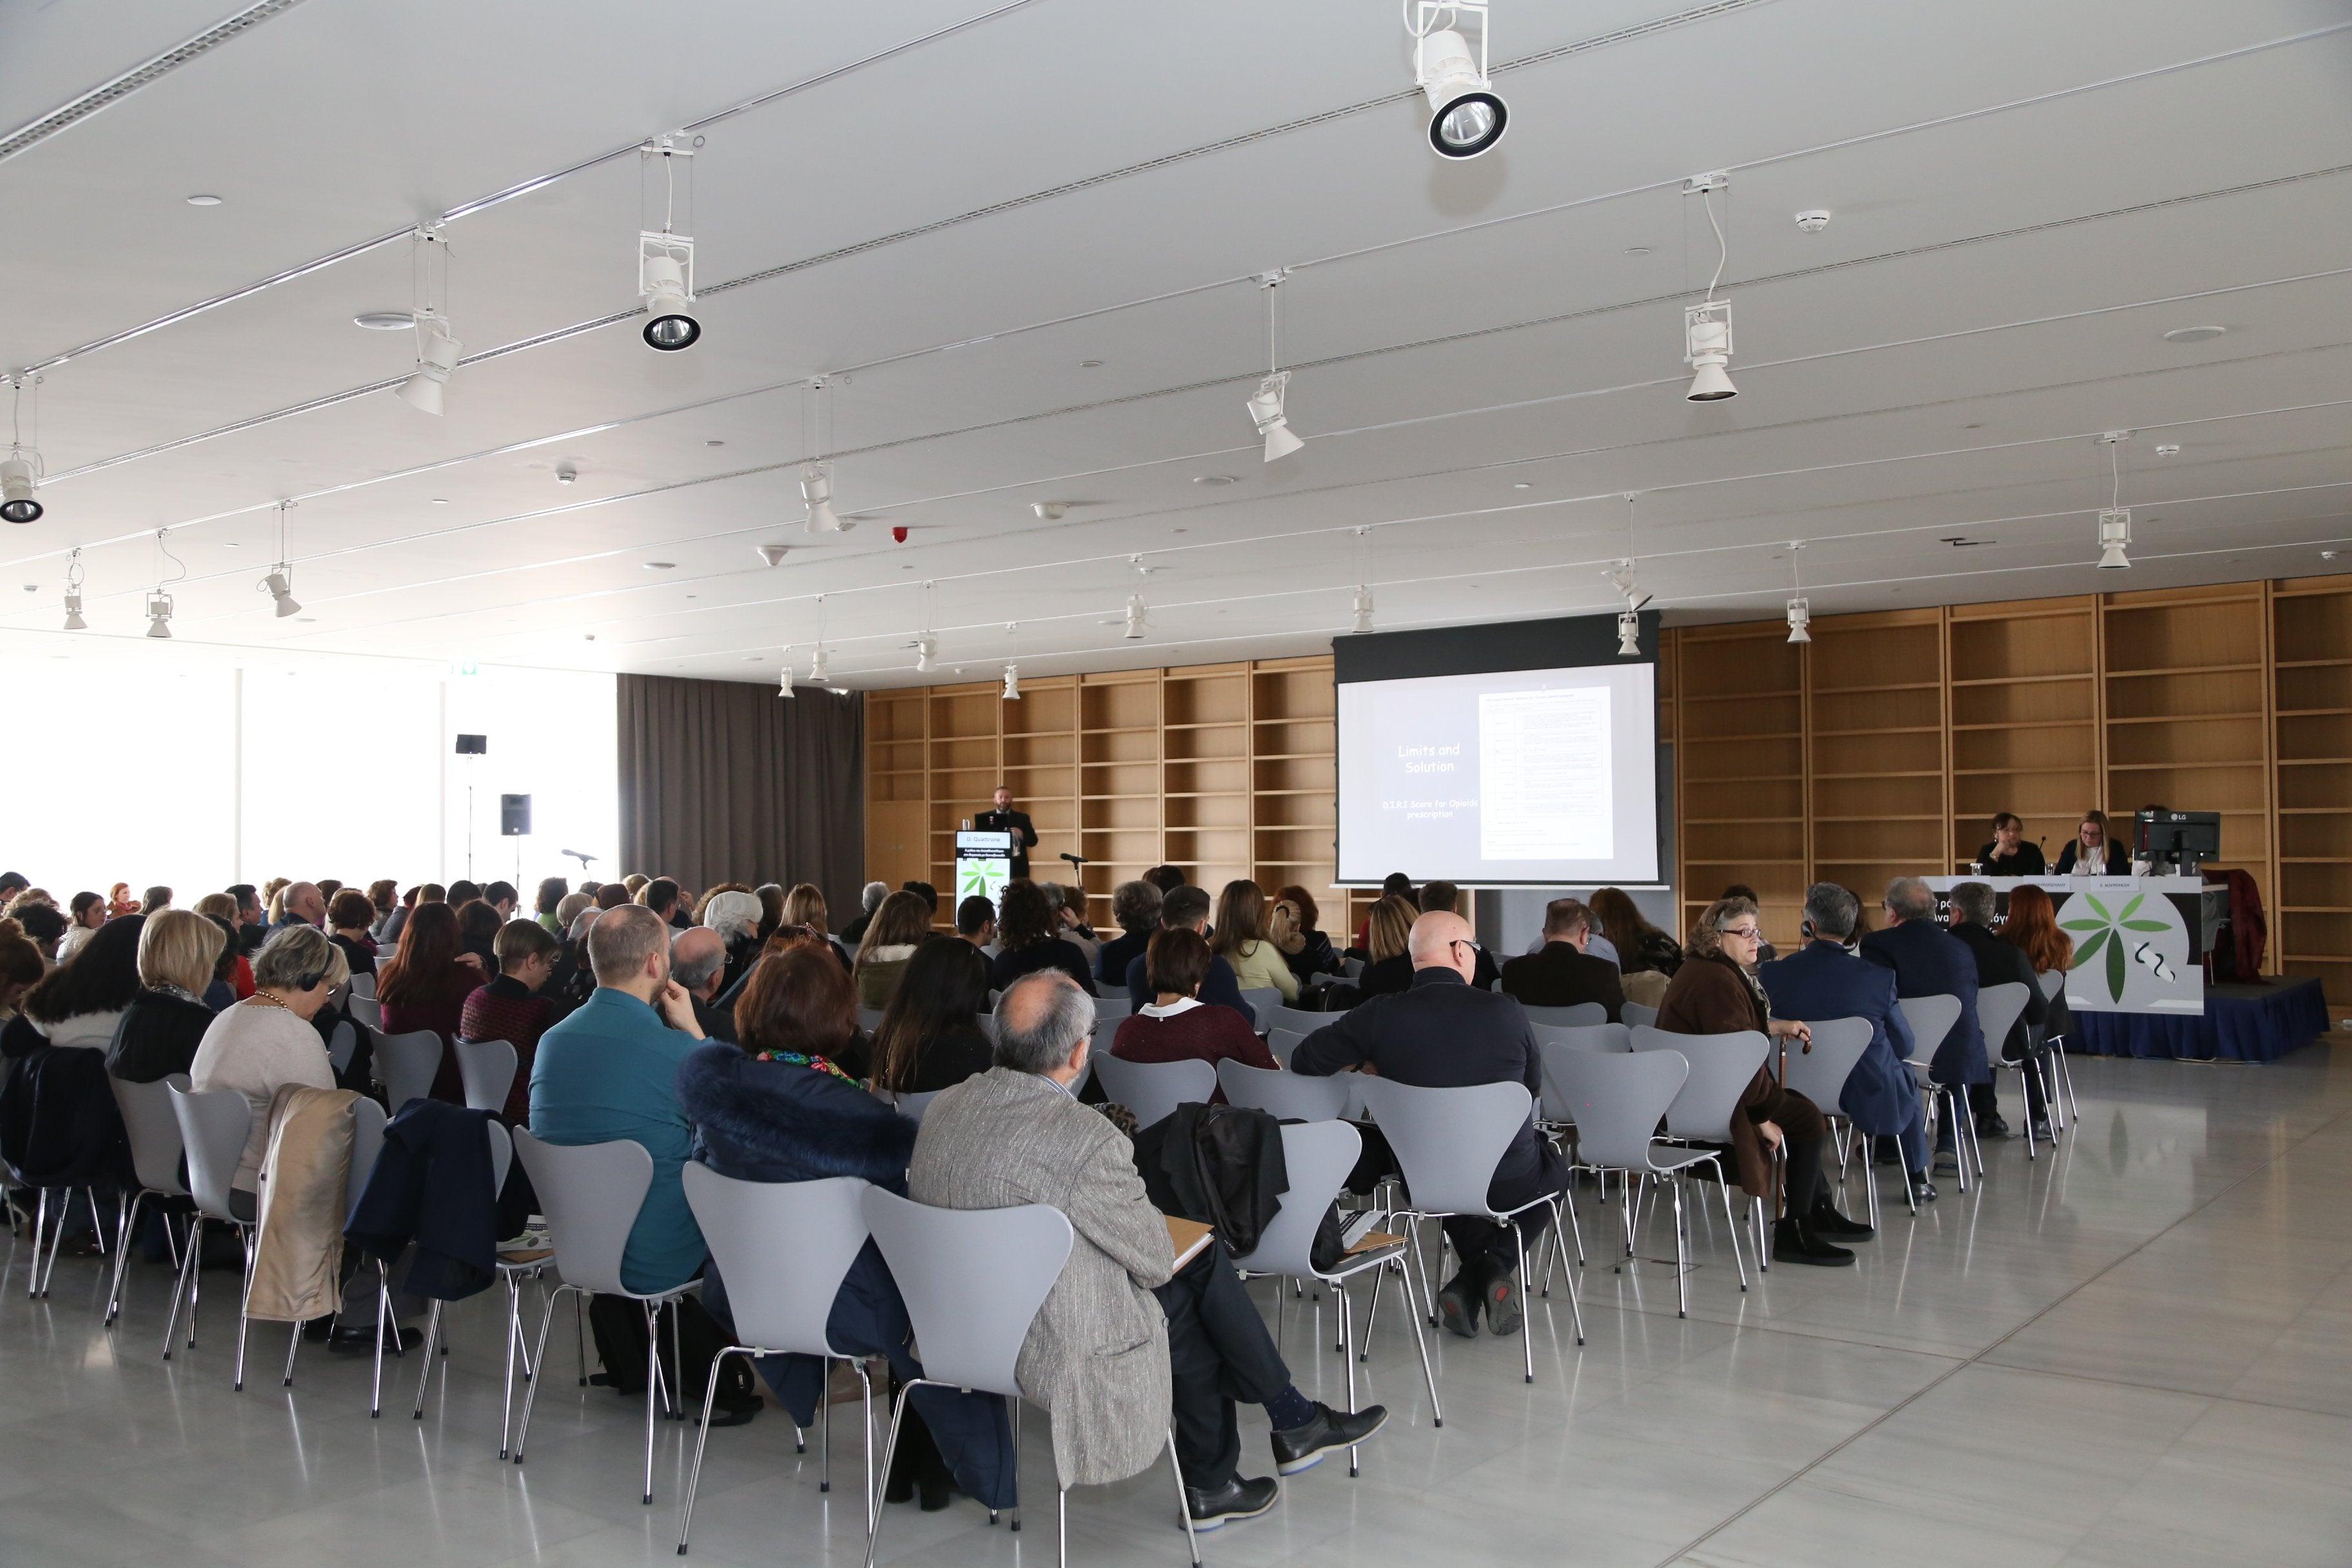 Over 170 anaesthetists and health professionals took part in the workshop